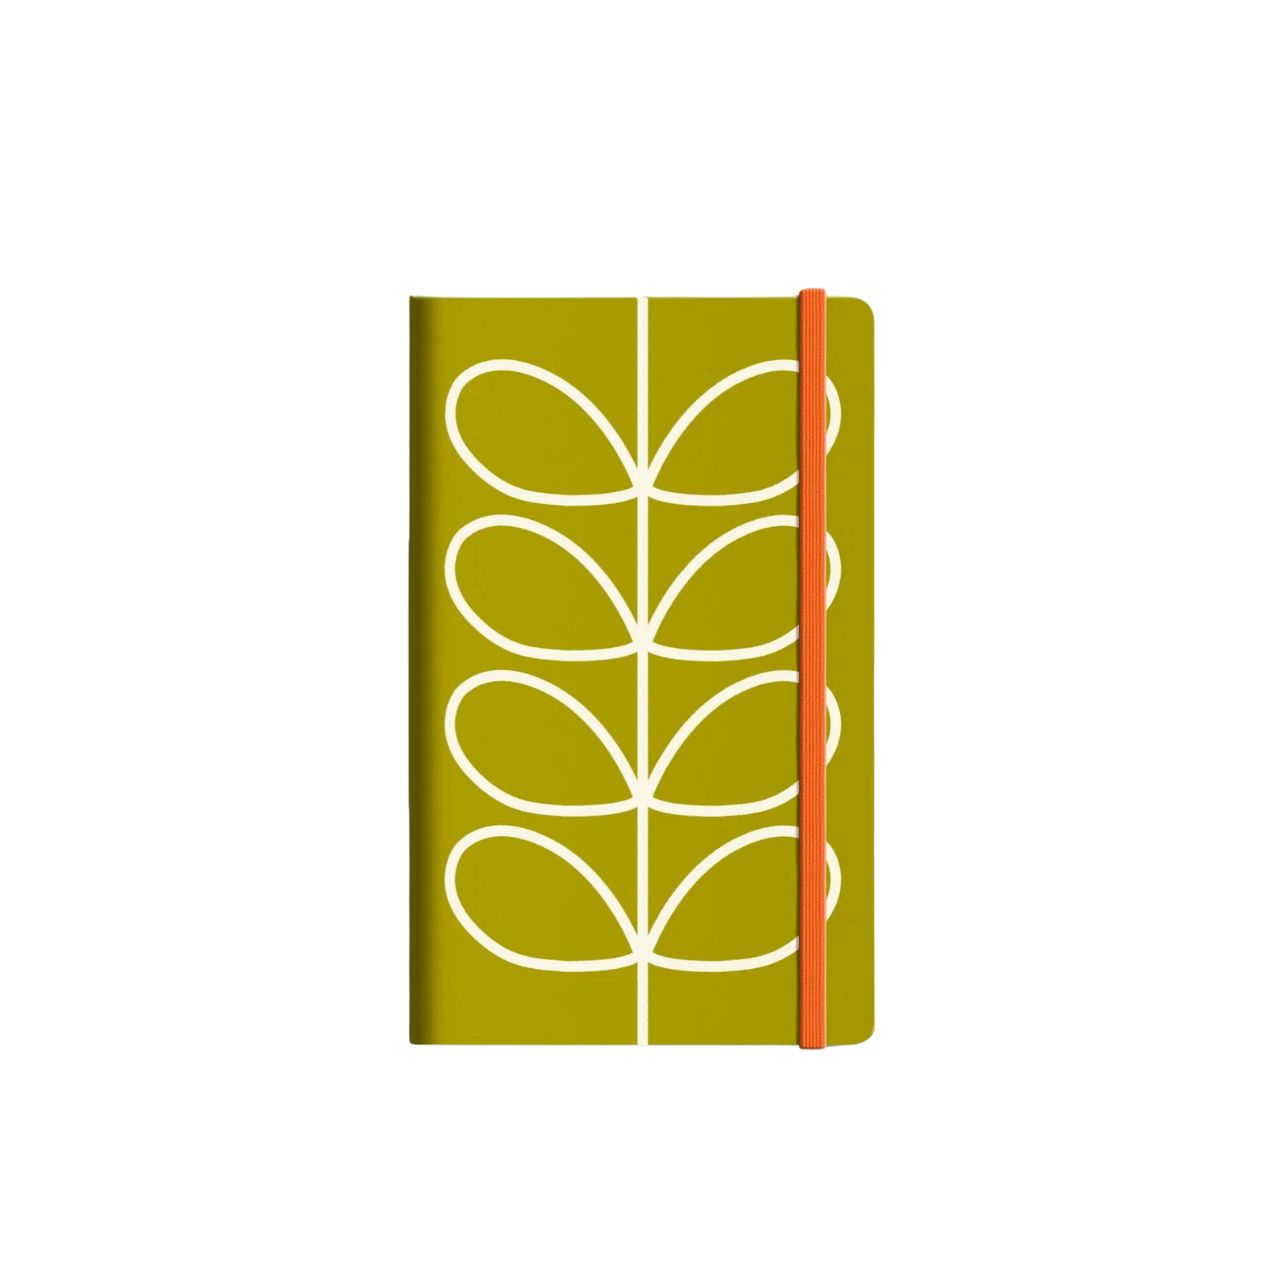 Orla Kiely Linear Stem Olive Small Notebook  Write down your goals, plans and your weekly shopping list in style with our Linear Stem Olive notebook. This notebook has a hardcover with rounded corners, an elastic closure and matching ribbon bookmark. Comes with a lined paper layout and expandable inner back pocket.